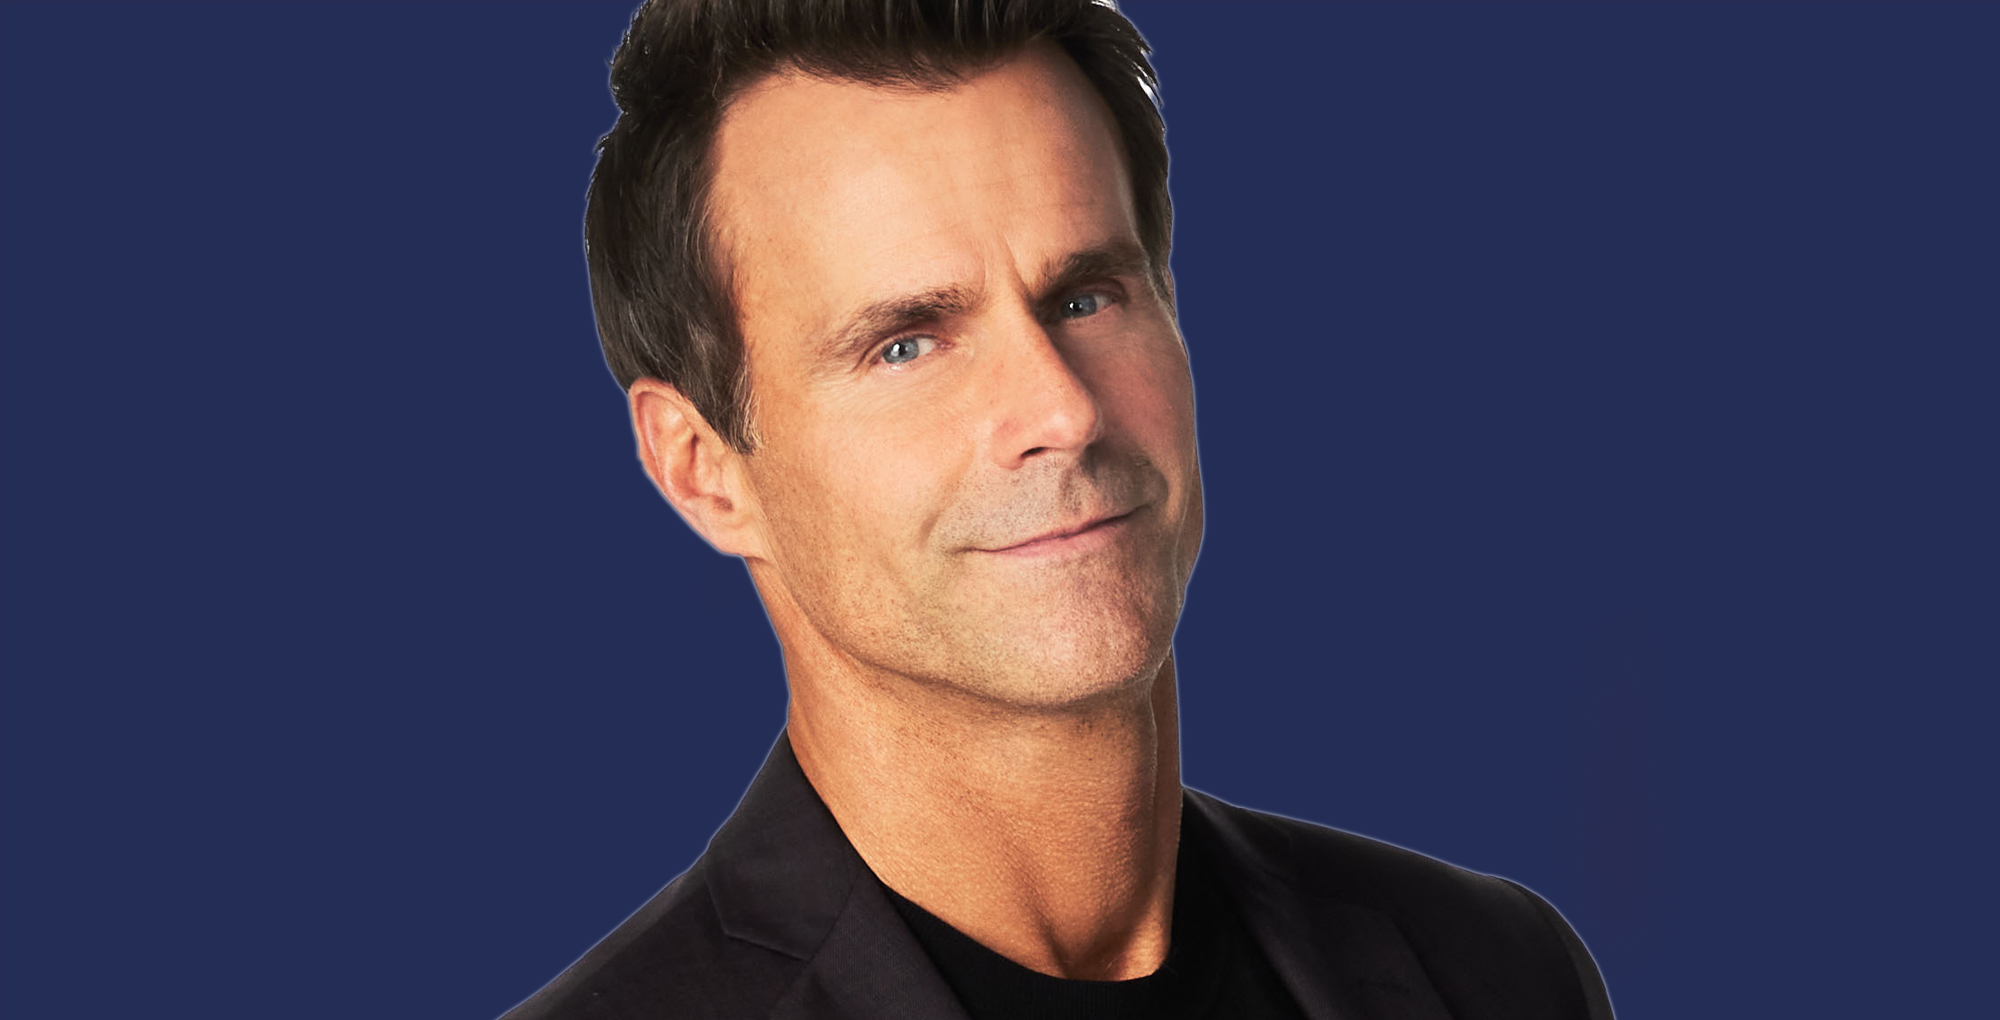 cameron mathison who plays drew cain on general hospital.